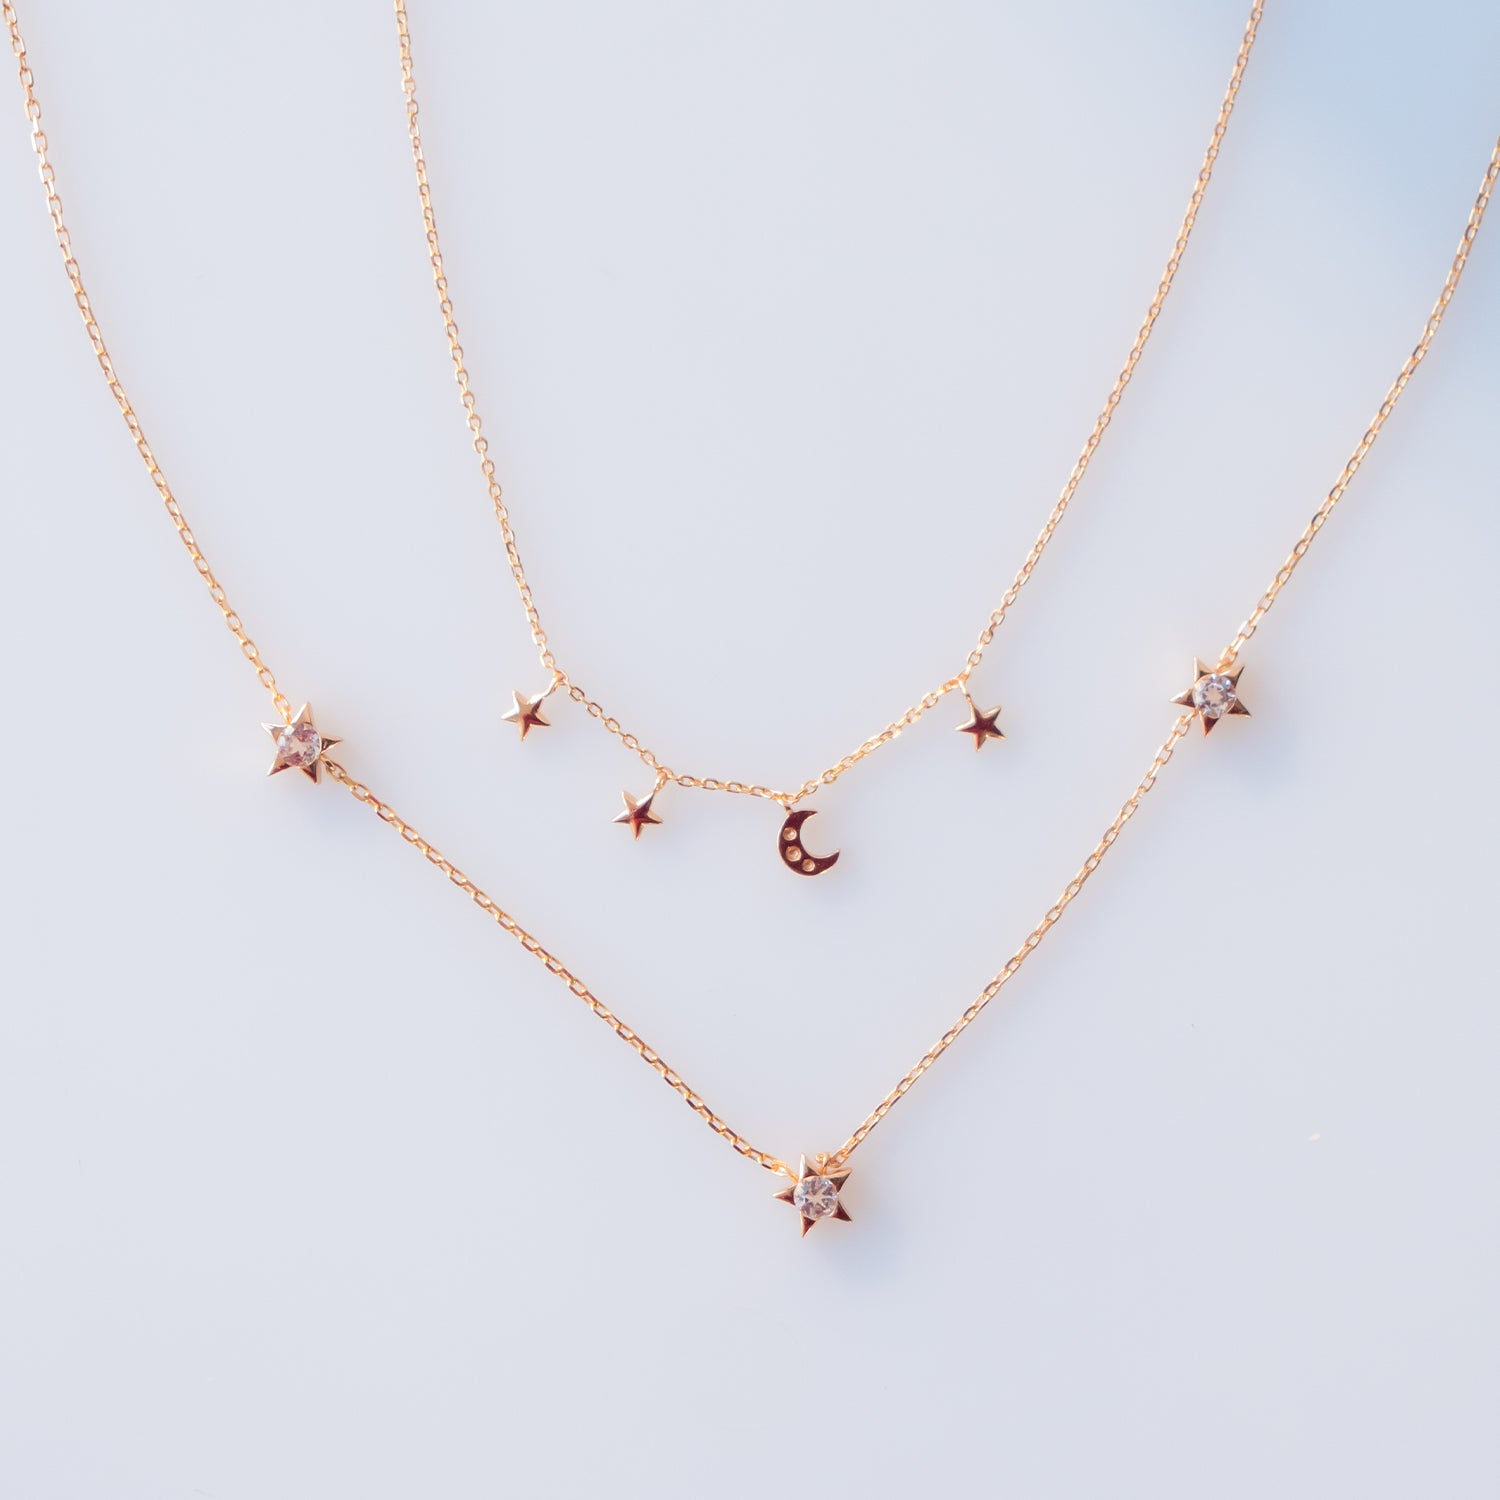 Starry Rose Layered Necklace